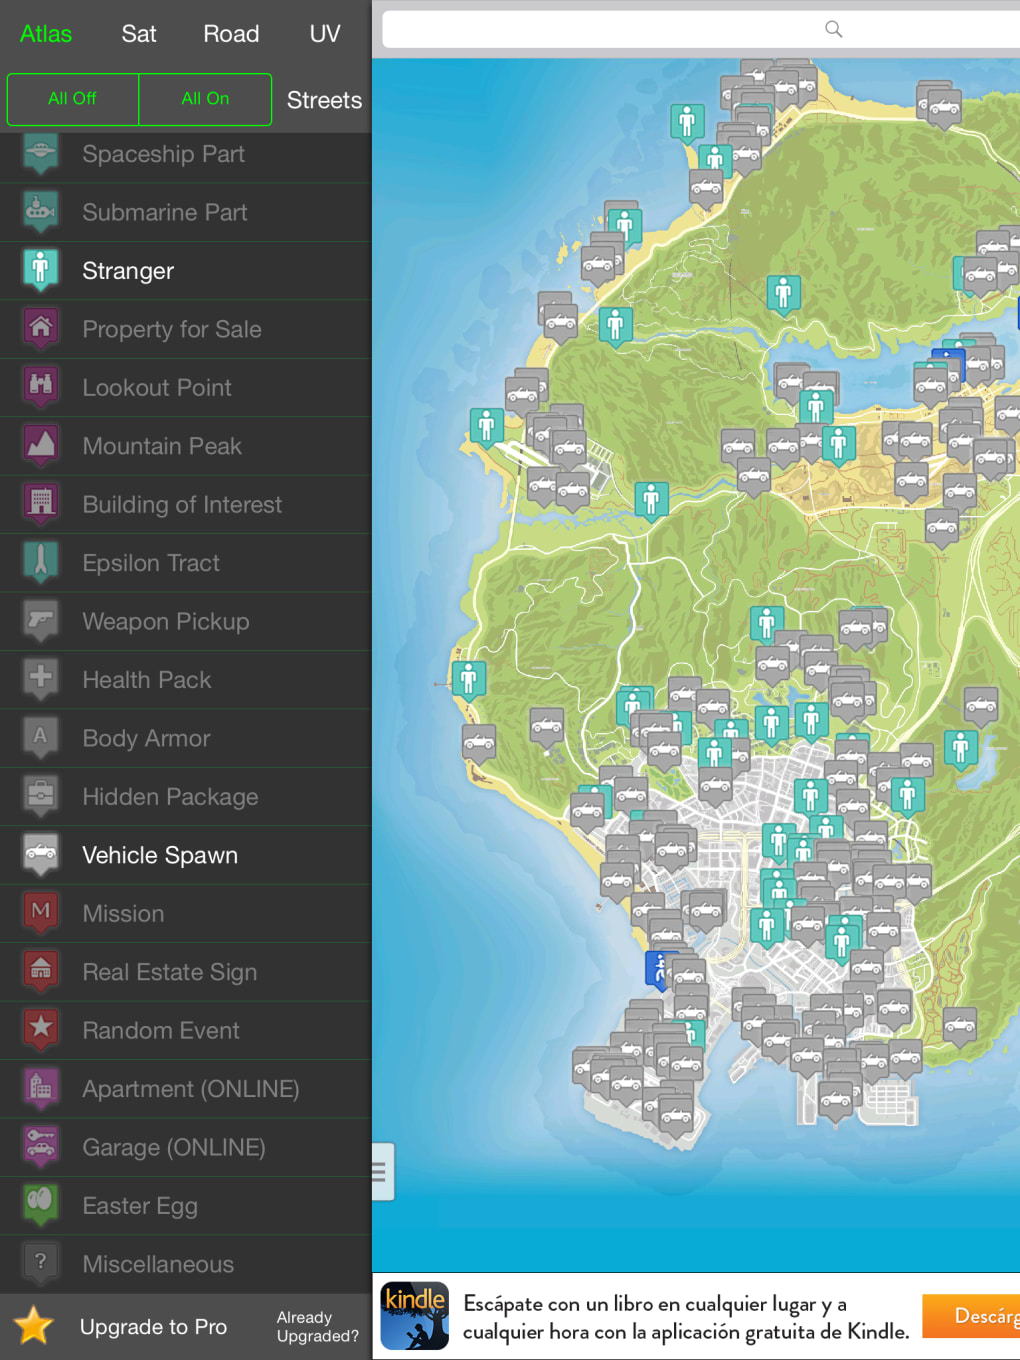 Interactive map for all GTA Online collectibles